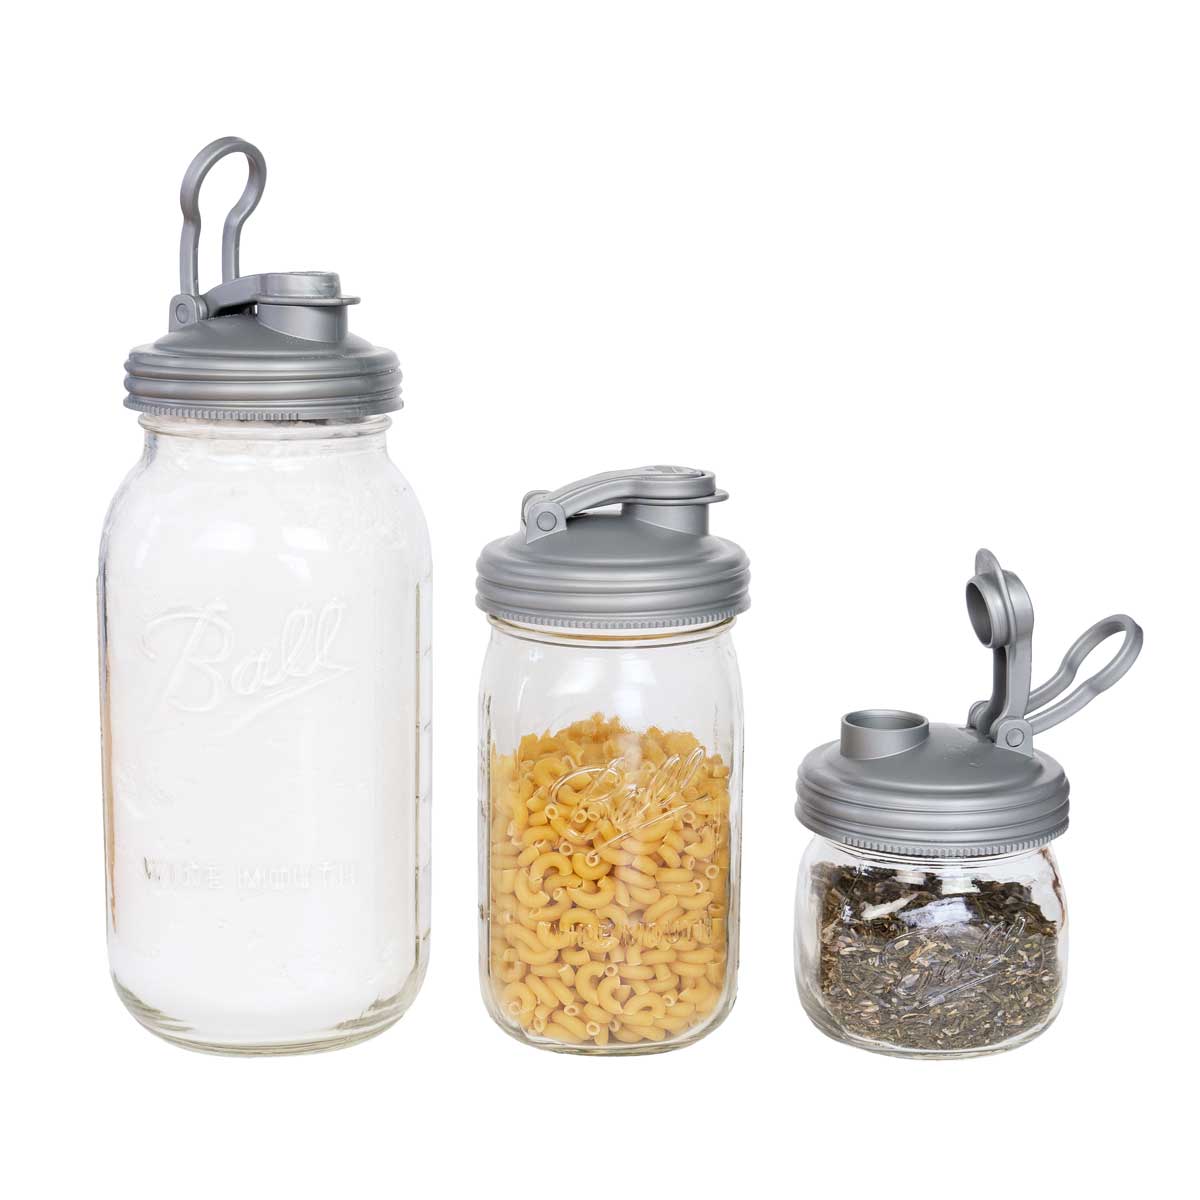 1 Gallon Glass Jar for Water with Lid and Pour Spout - Fits Mini